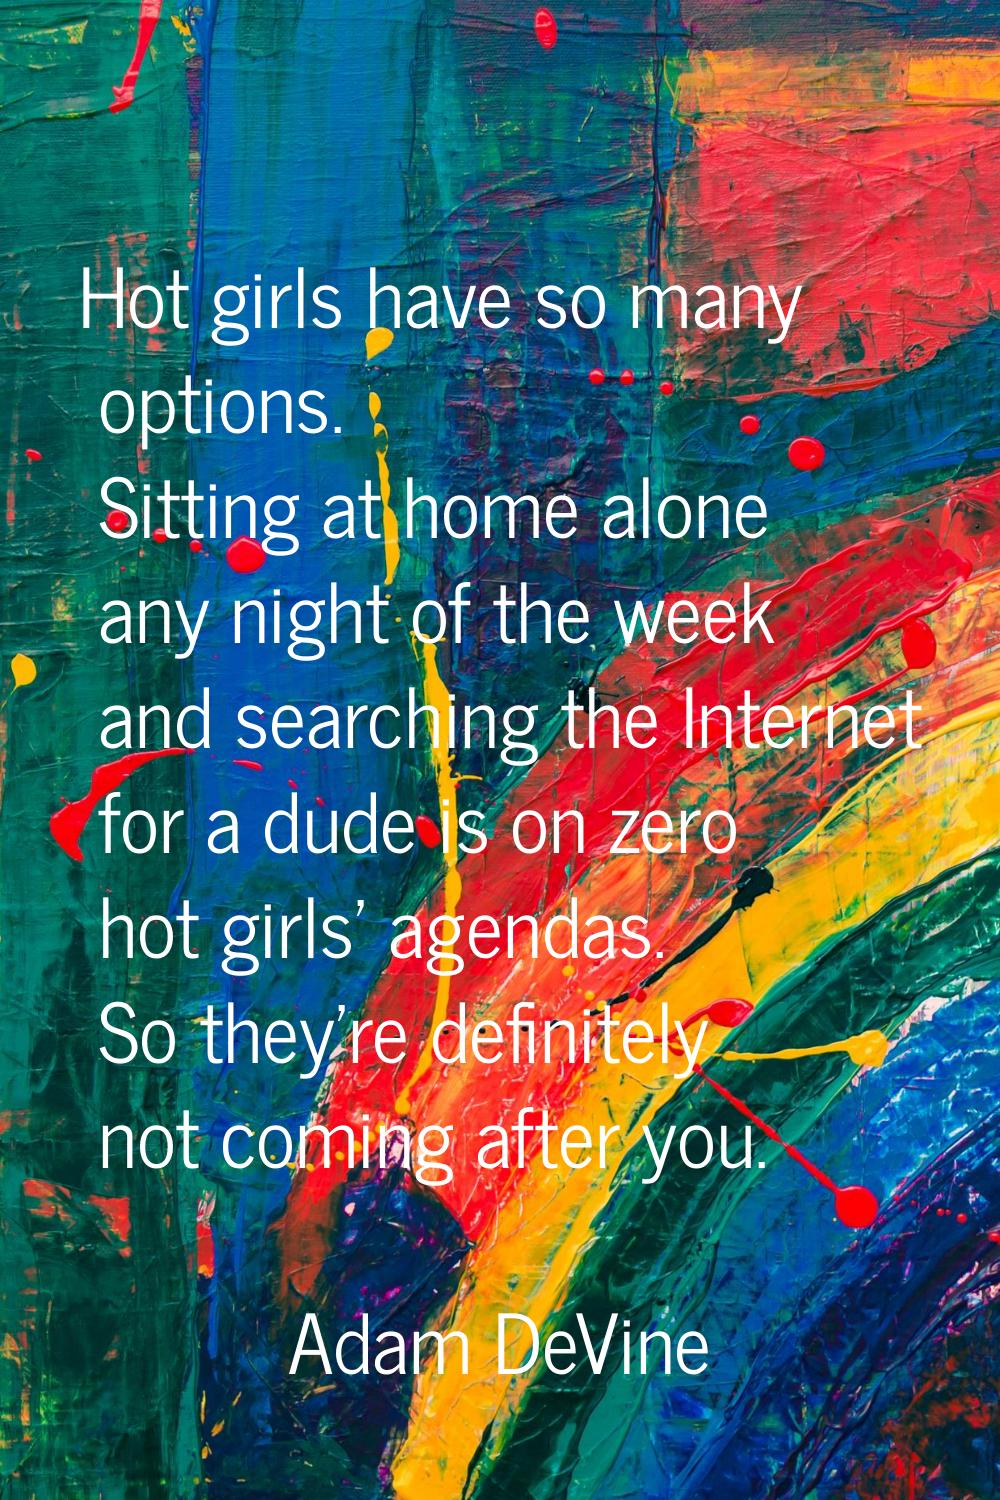 Hot girls have so many options. Sitting at home alone any night of the week and searching the Inter